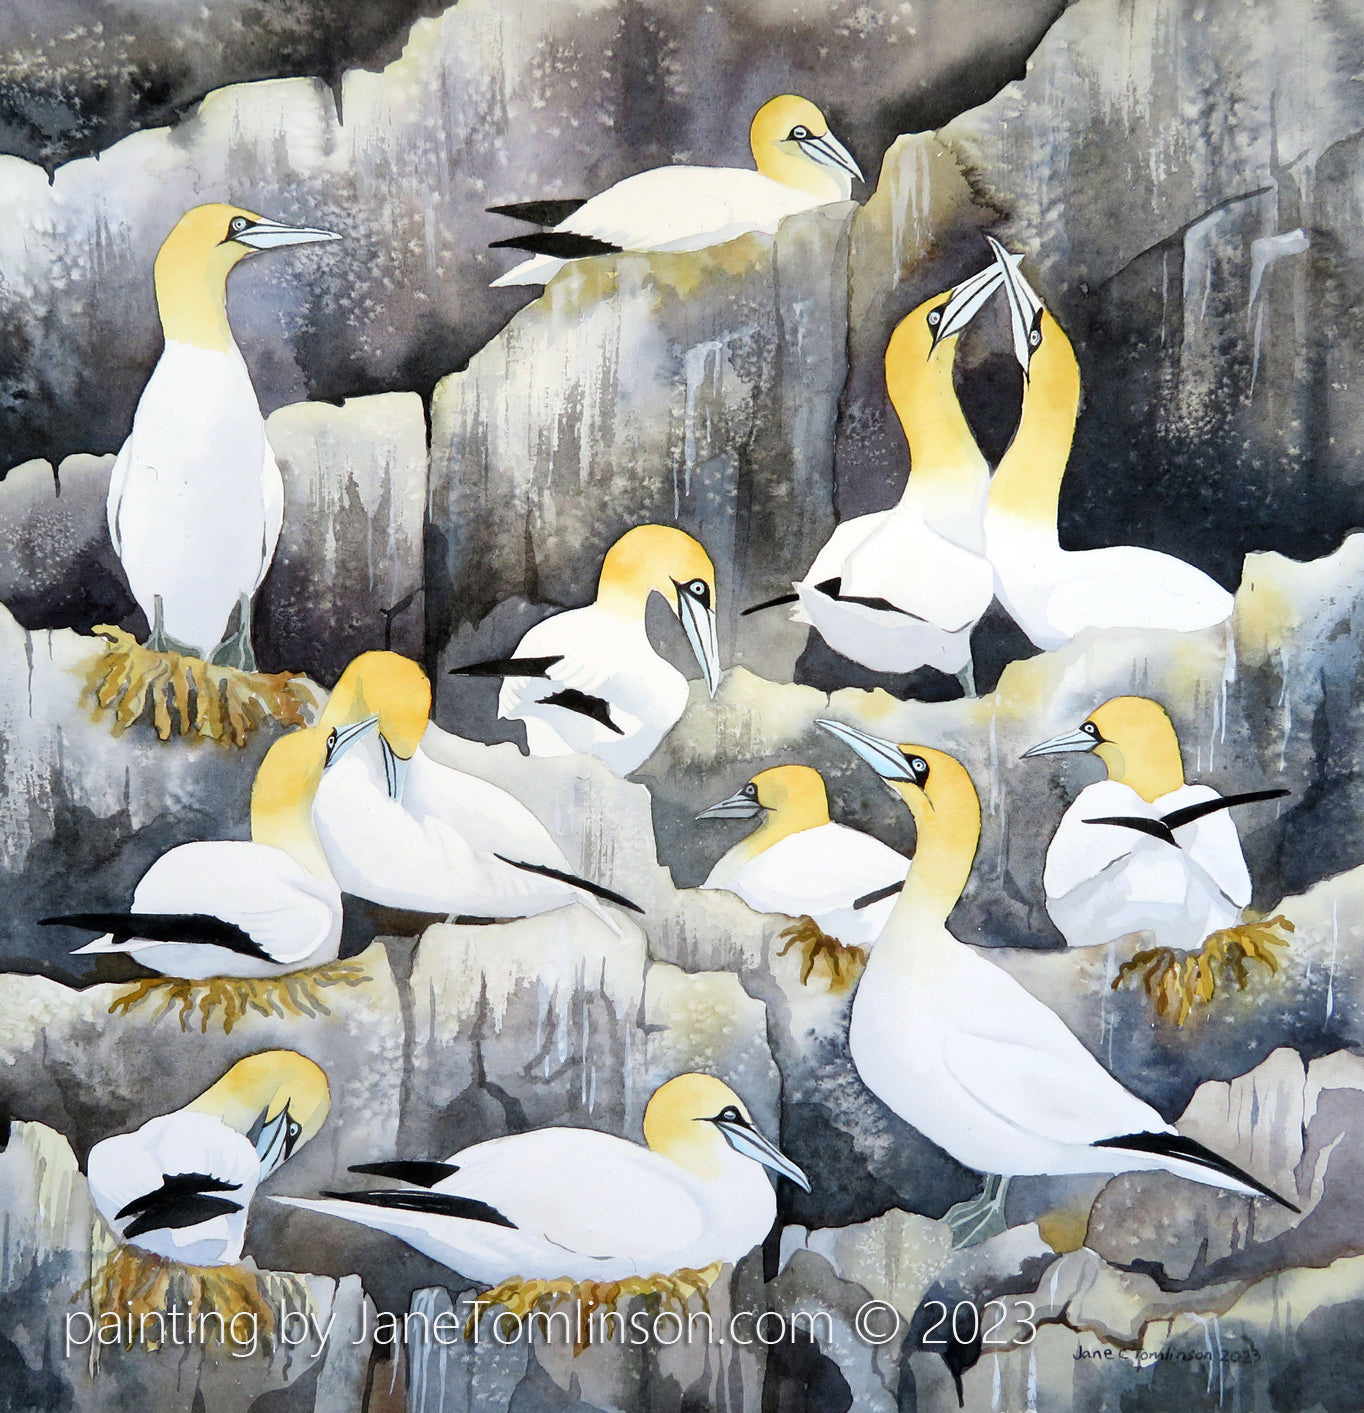 Painting of gannets at Bass Rock